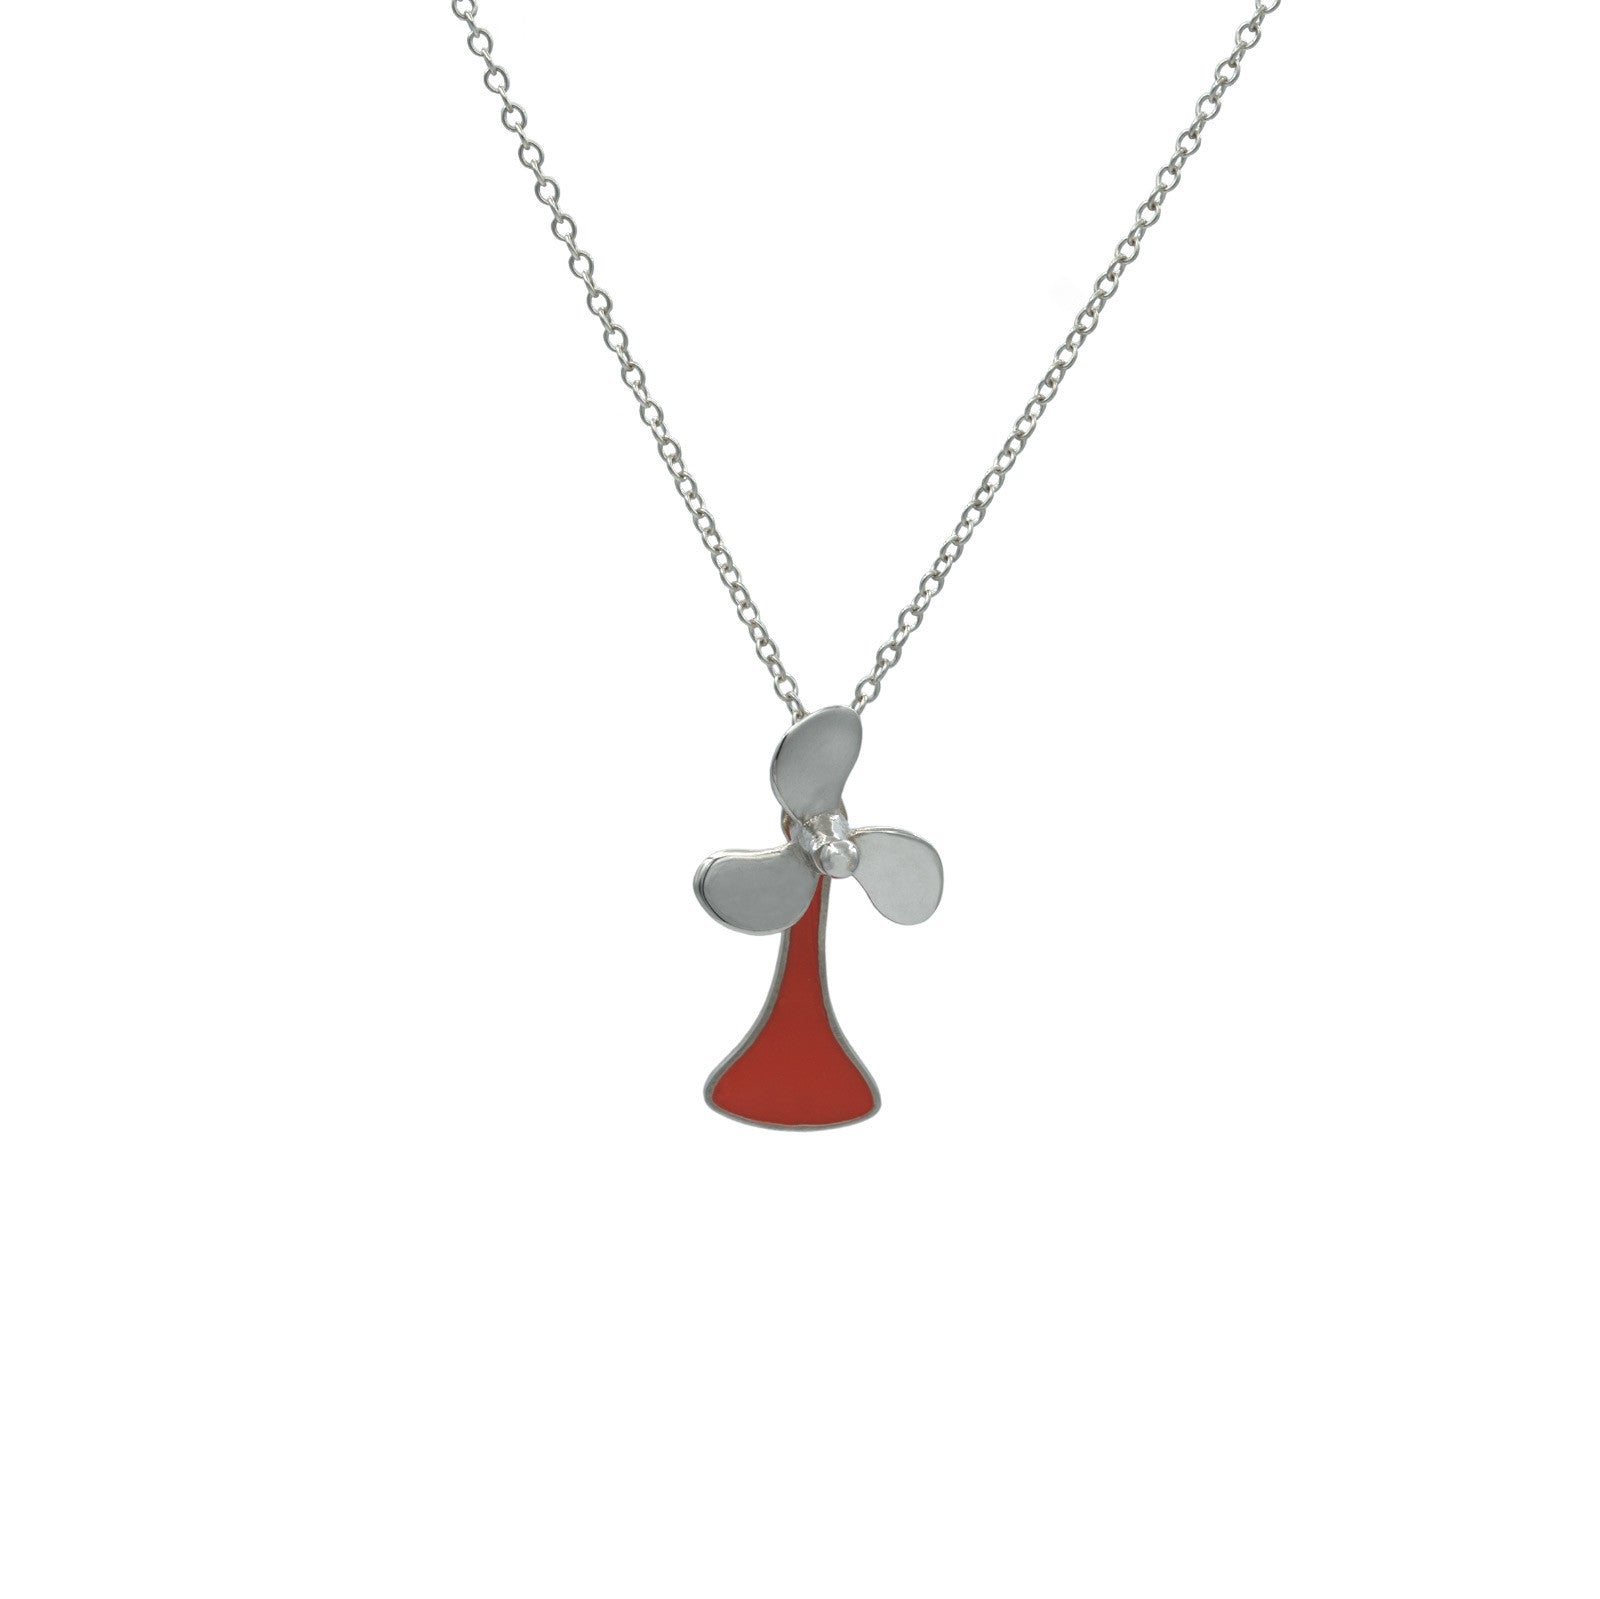 Propeller necklace silver and red